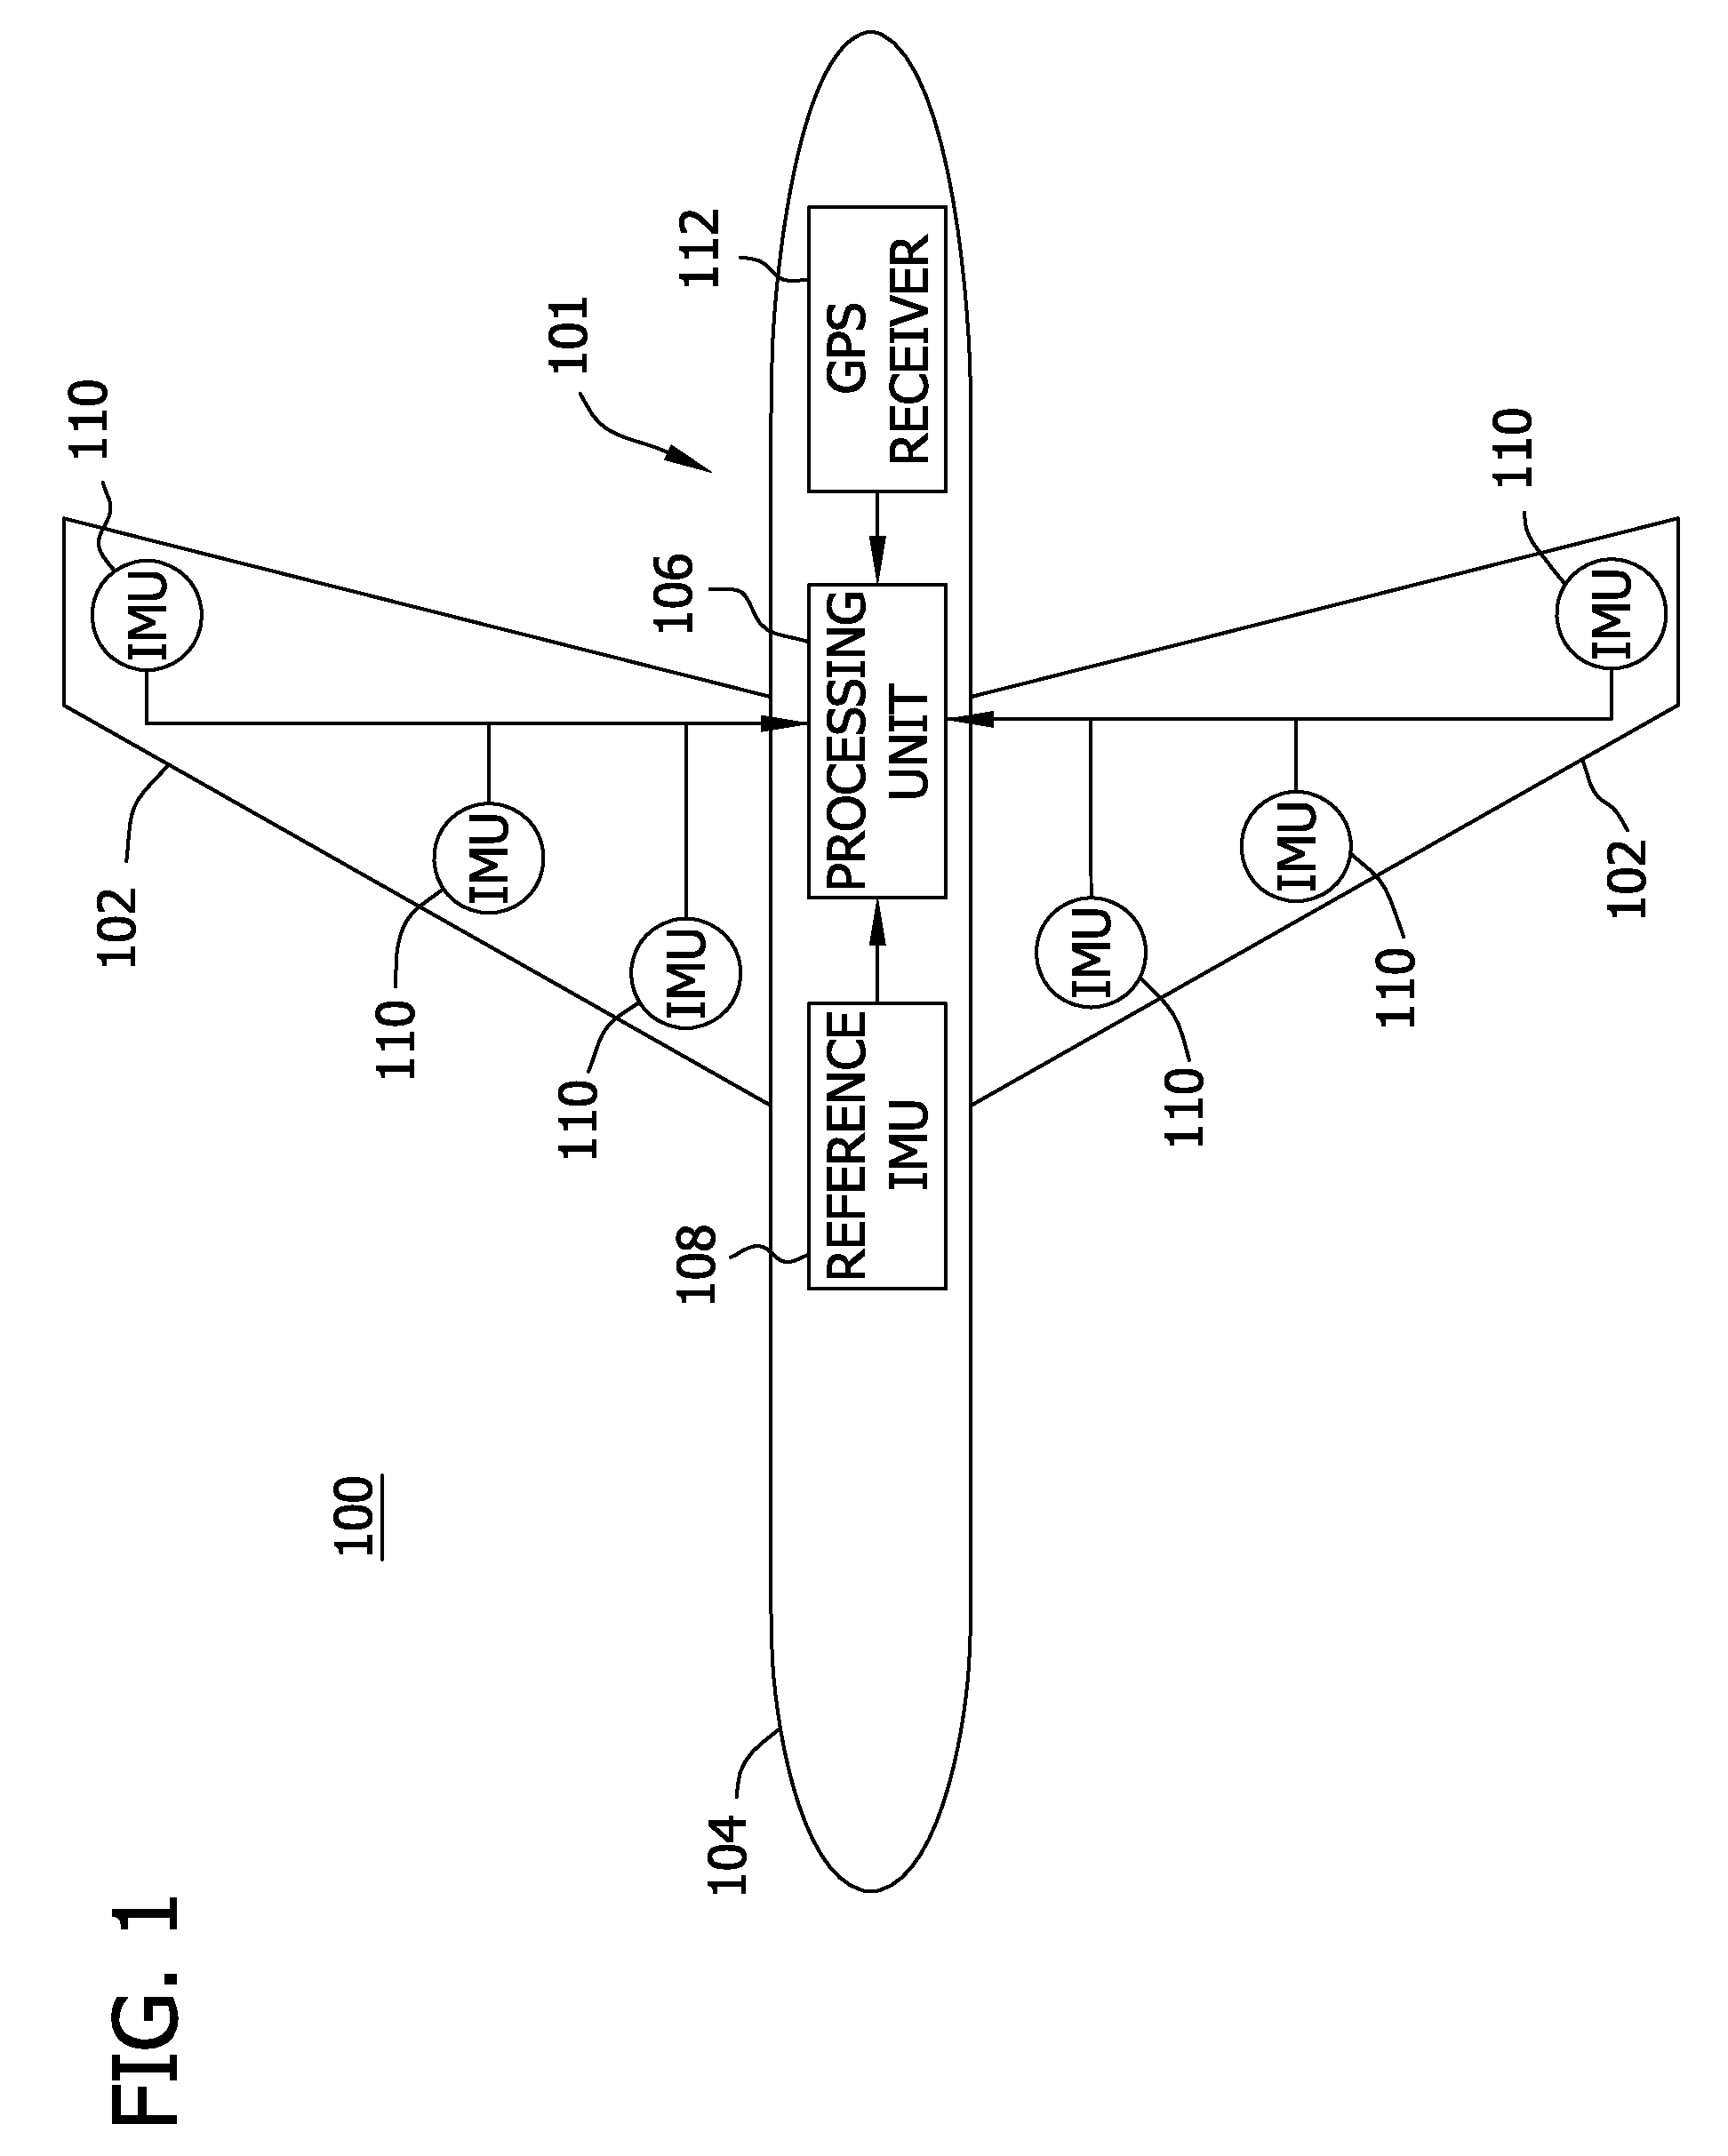 Methods and systems for active wing and lift surface control using integrated aeroelasticity measurements